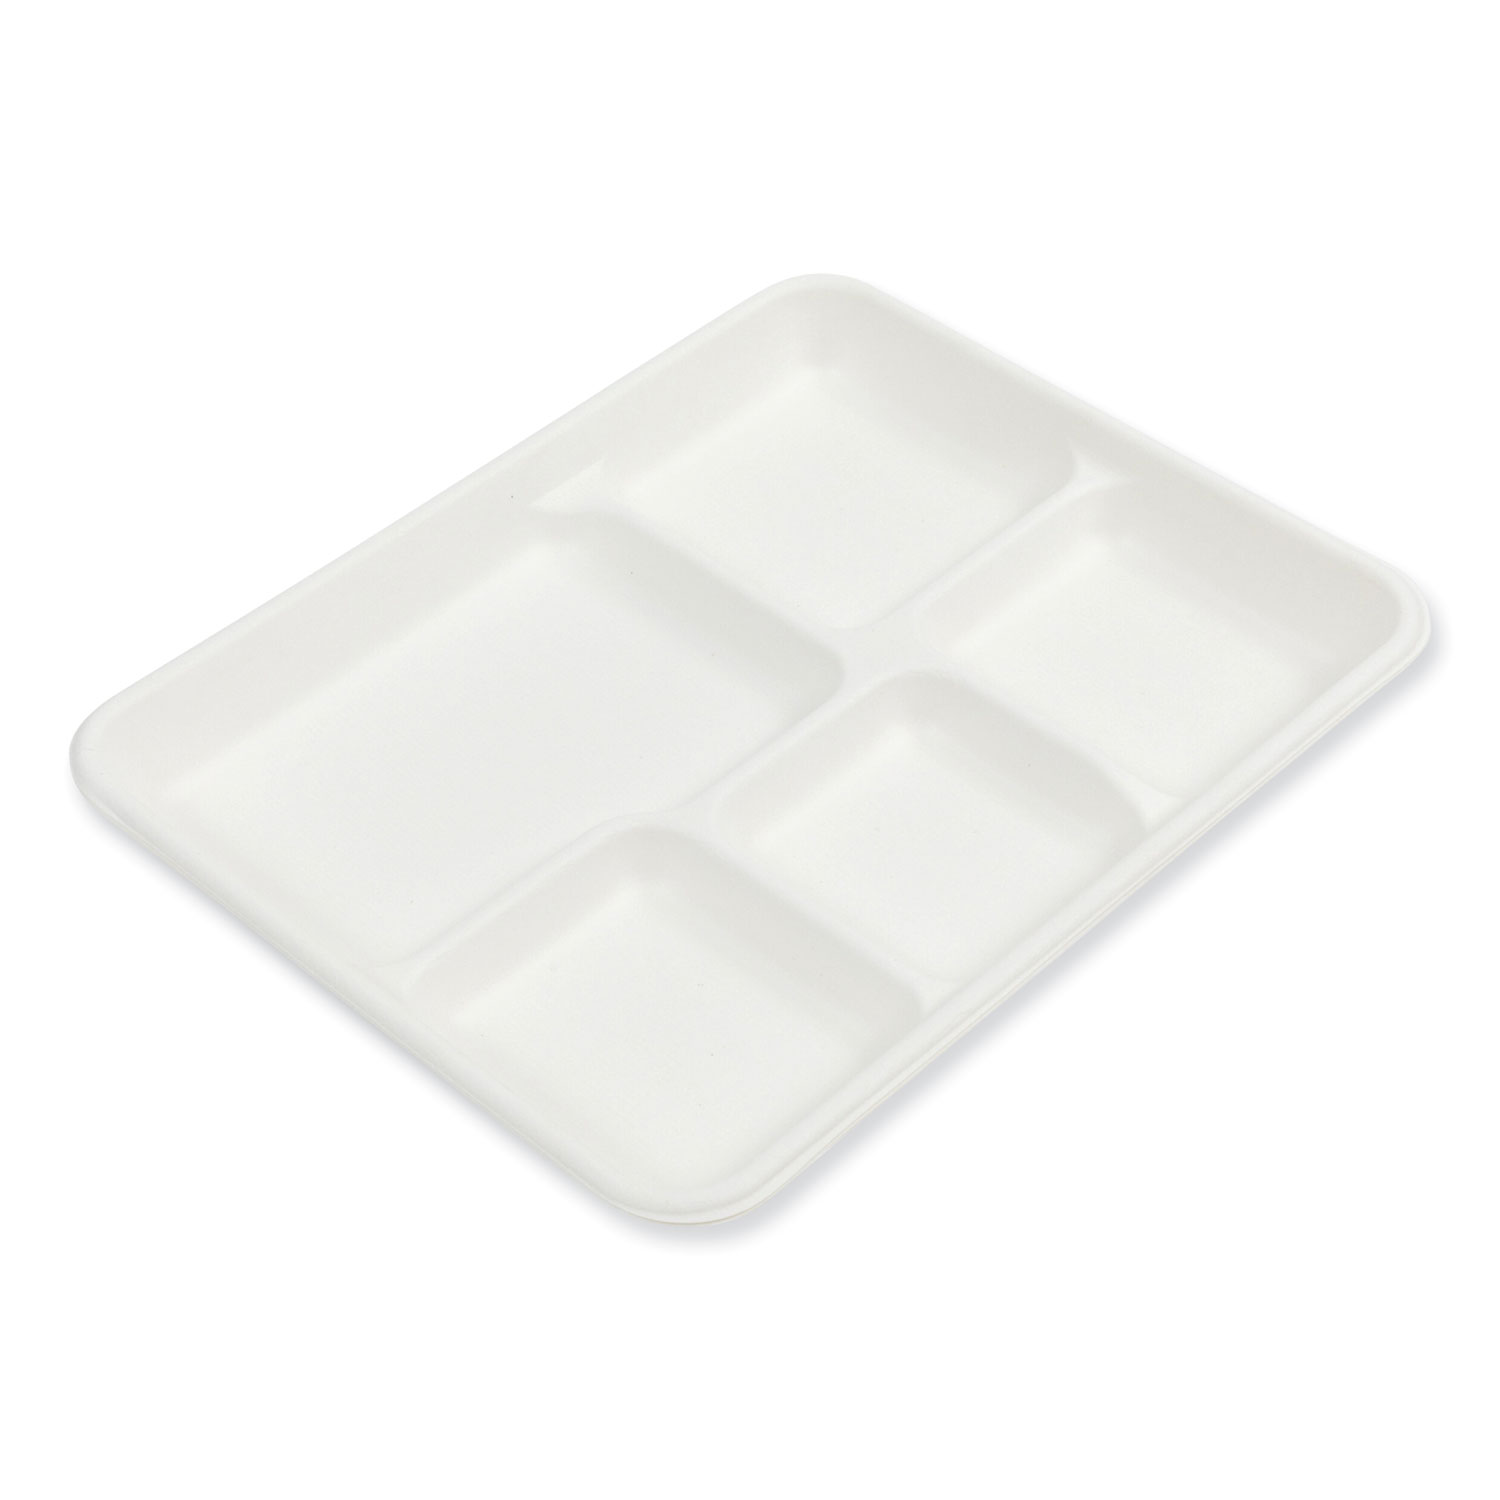 No PFAS added 5 Compartment Lunch Trays, Case of 500